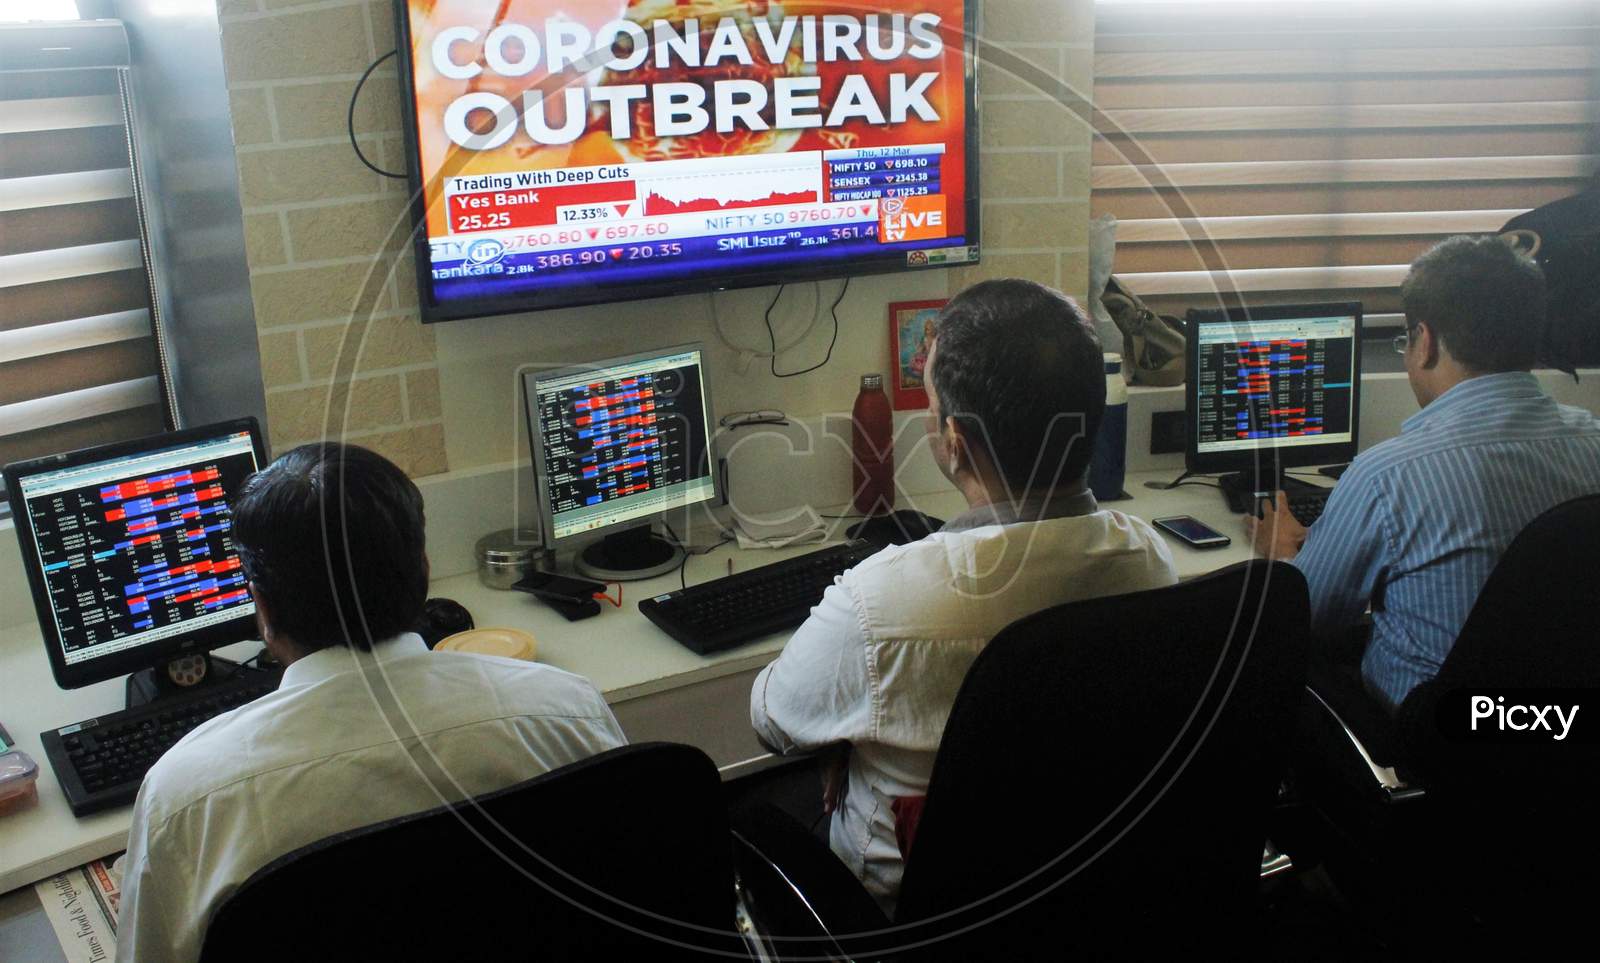 Brokers work at their computer terminal at a stock brokerage firm following the coronavirus outbreak, in Mumbai, India on March 12, 2020.